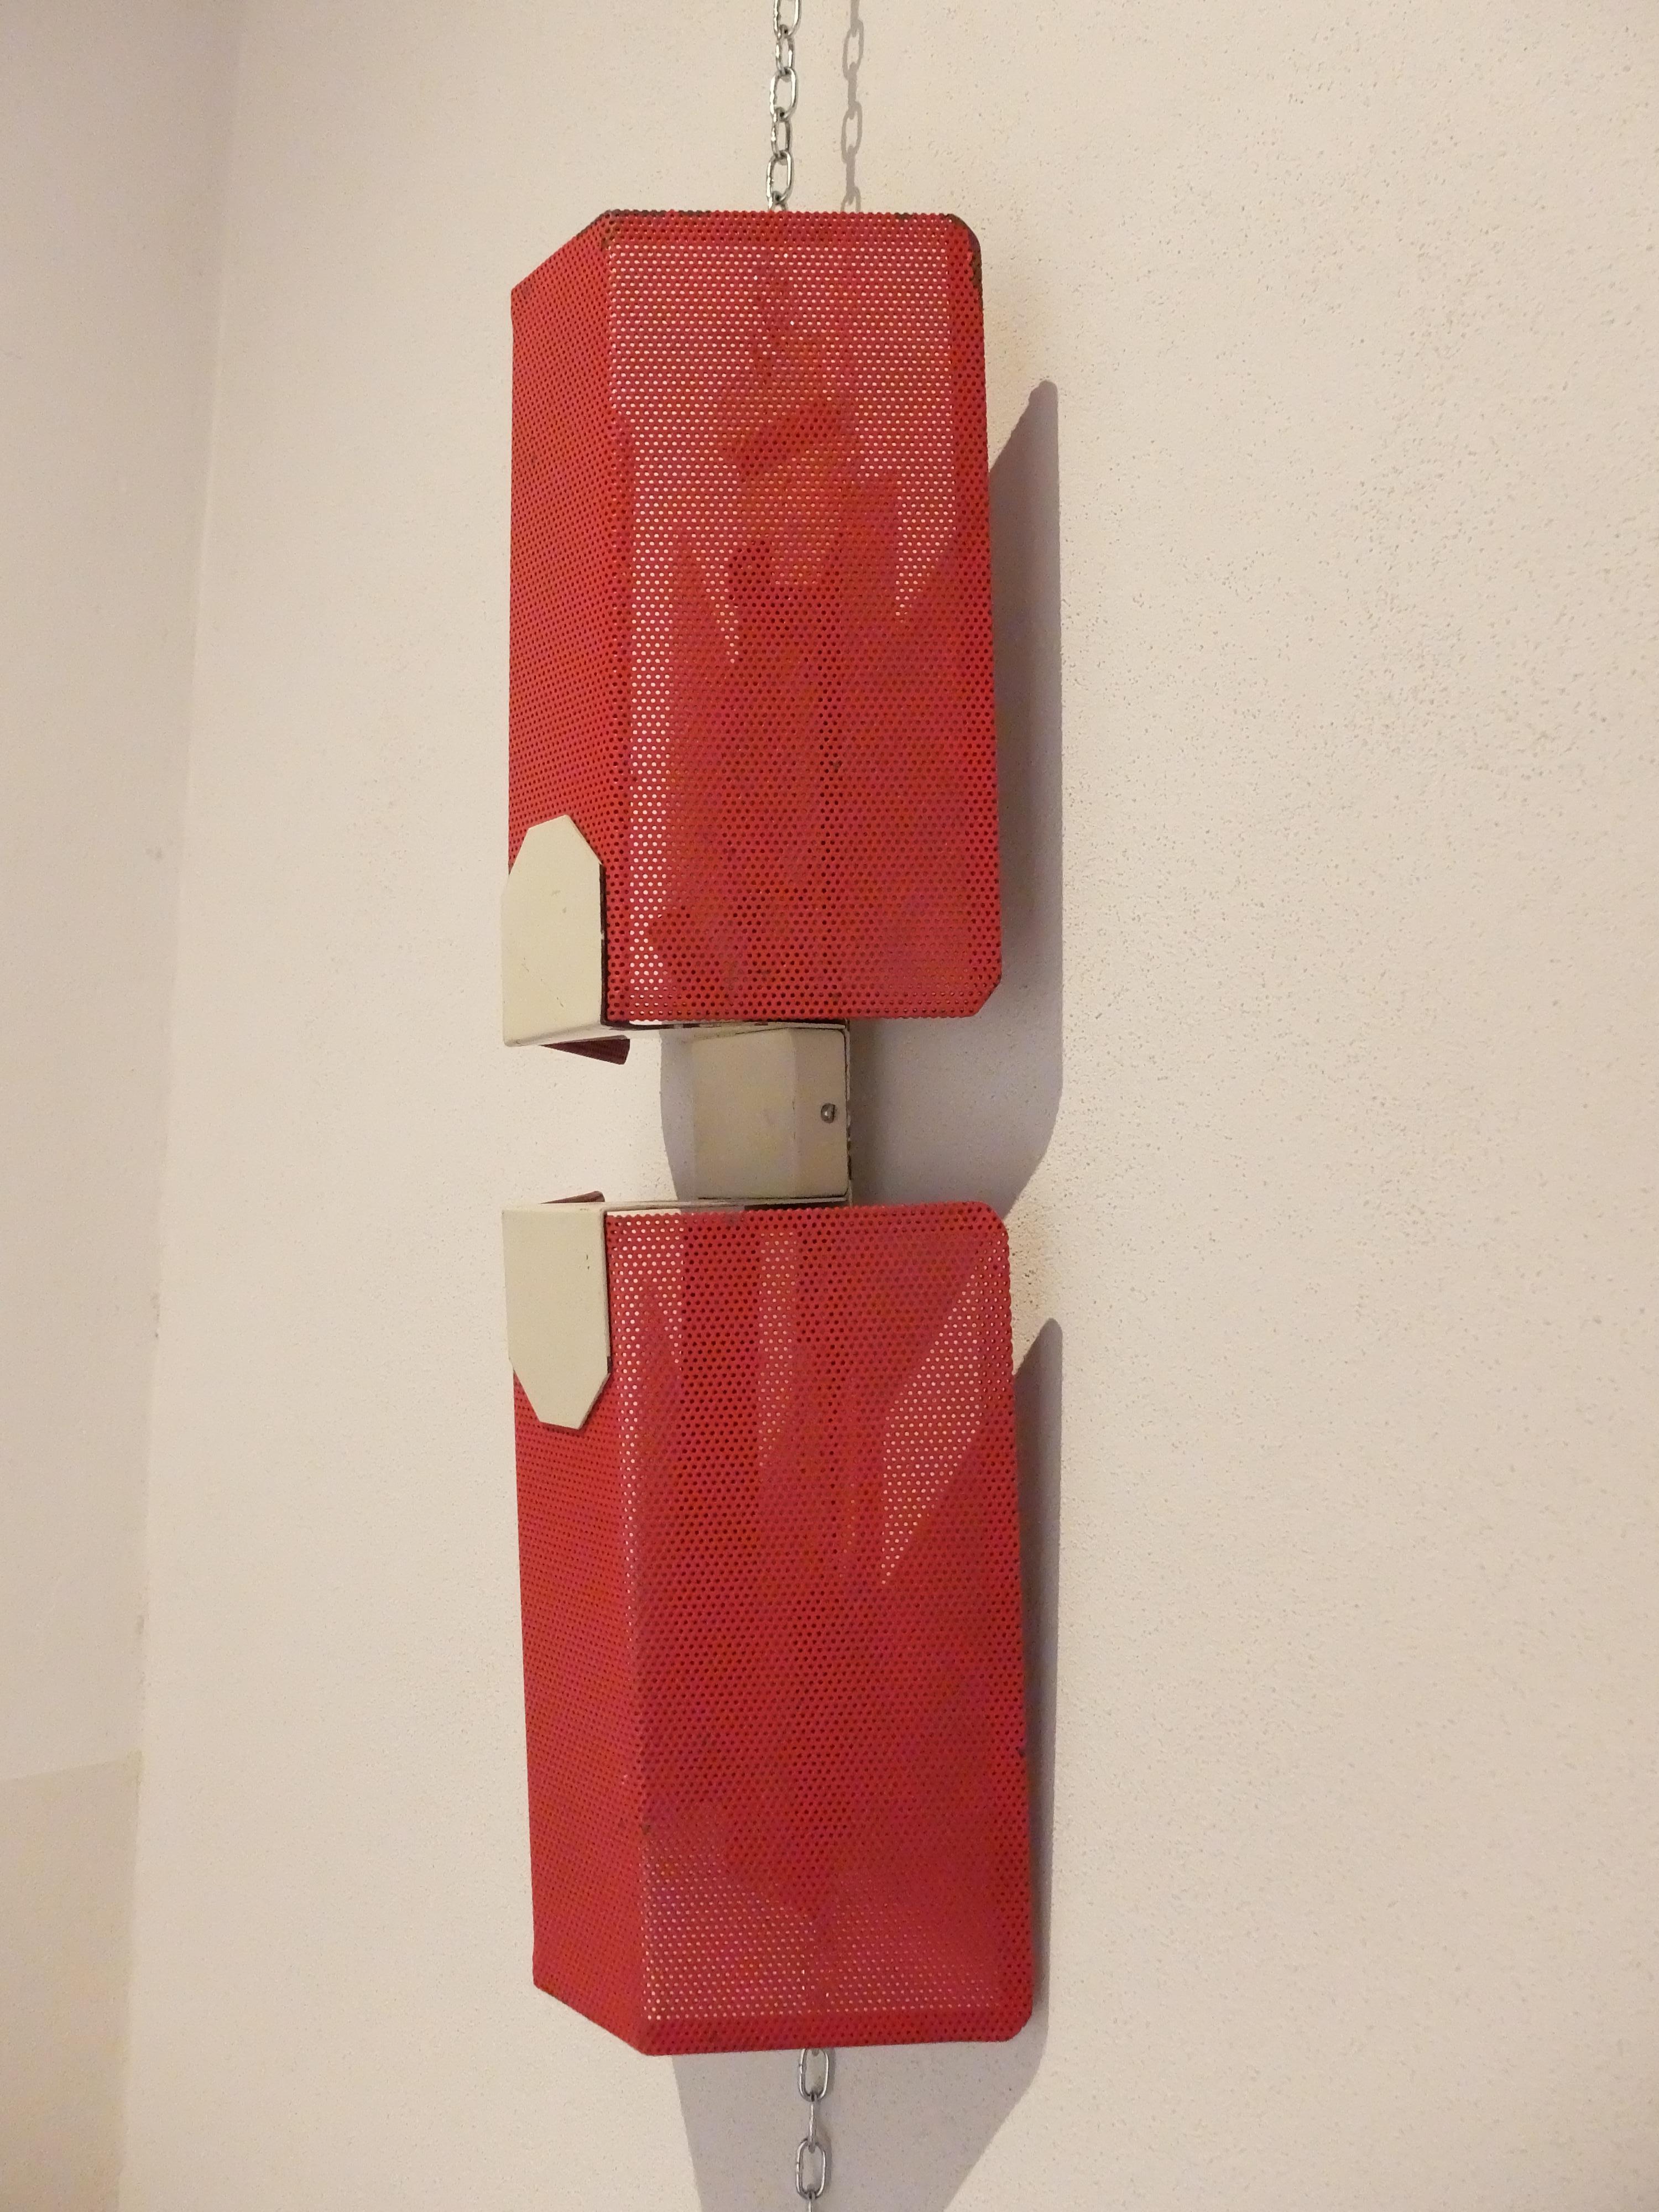 Sheet Metal French Mid-Century Modern, Pair of Red Metal Appliques by Mathieu Matégot, 1950s For Sale